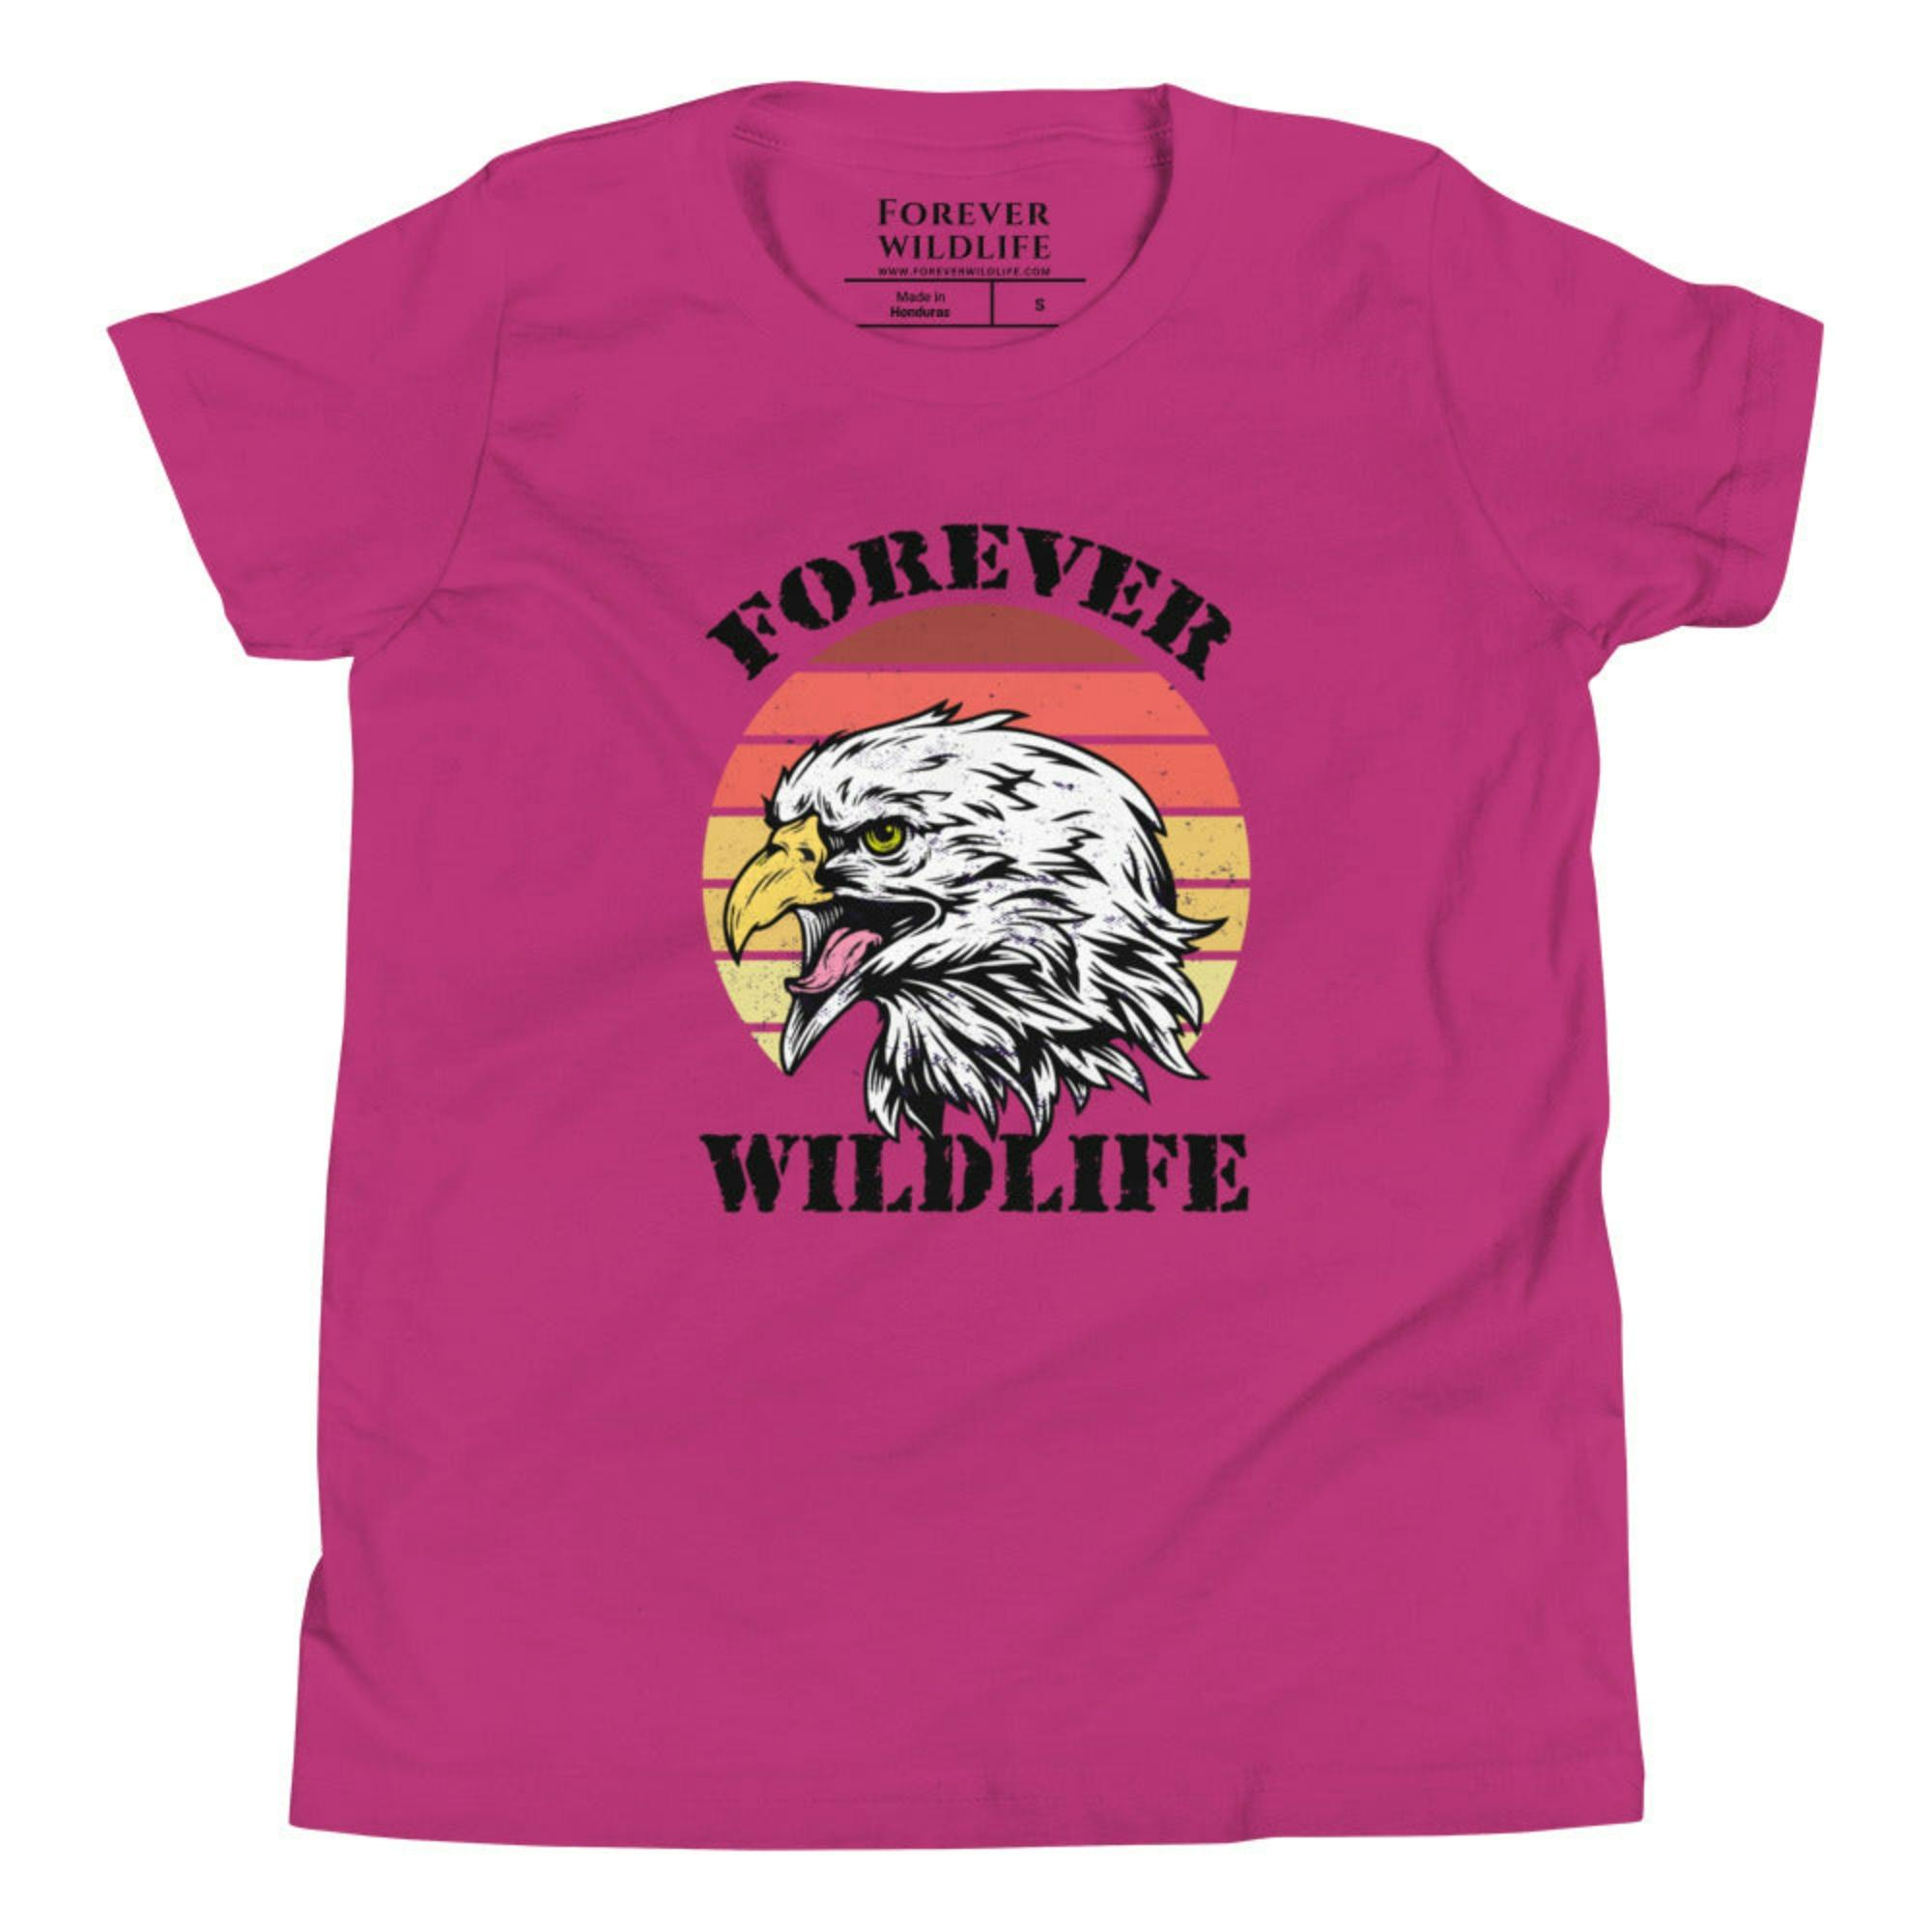 Berry Youth T-Shirt with Eagle graphic as part of Wildlife T Shirts, Wildlife Clothing & Apparel by Forever Wildlife